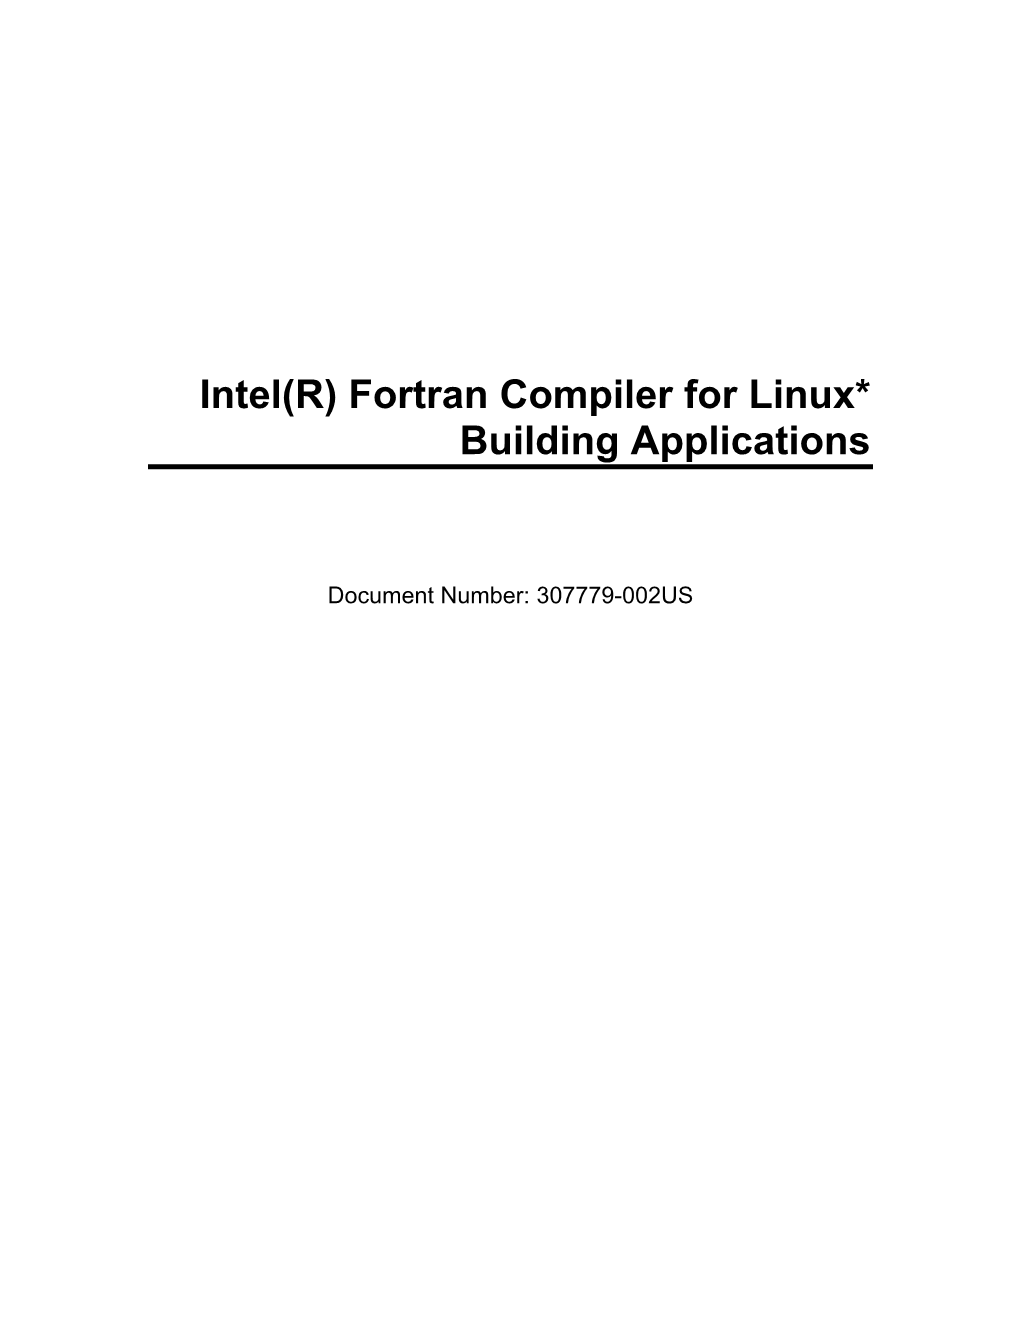 Intel(R) Fortran Compiler for Linux* Building Applications